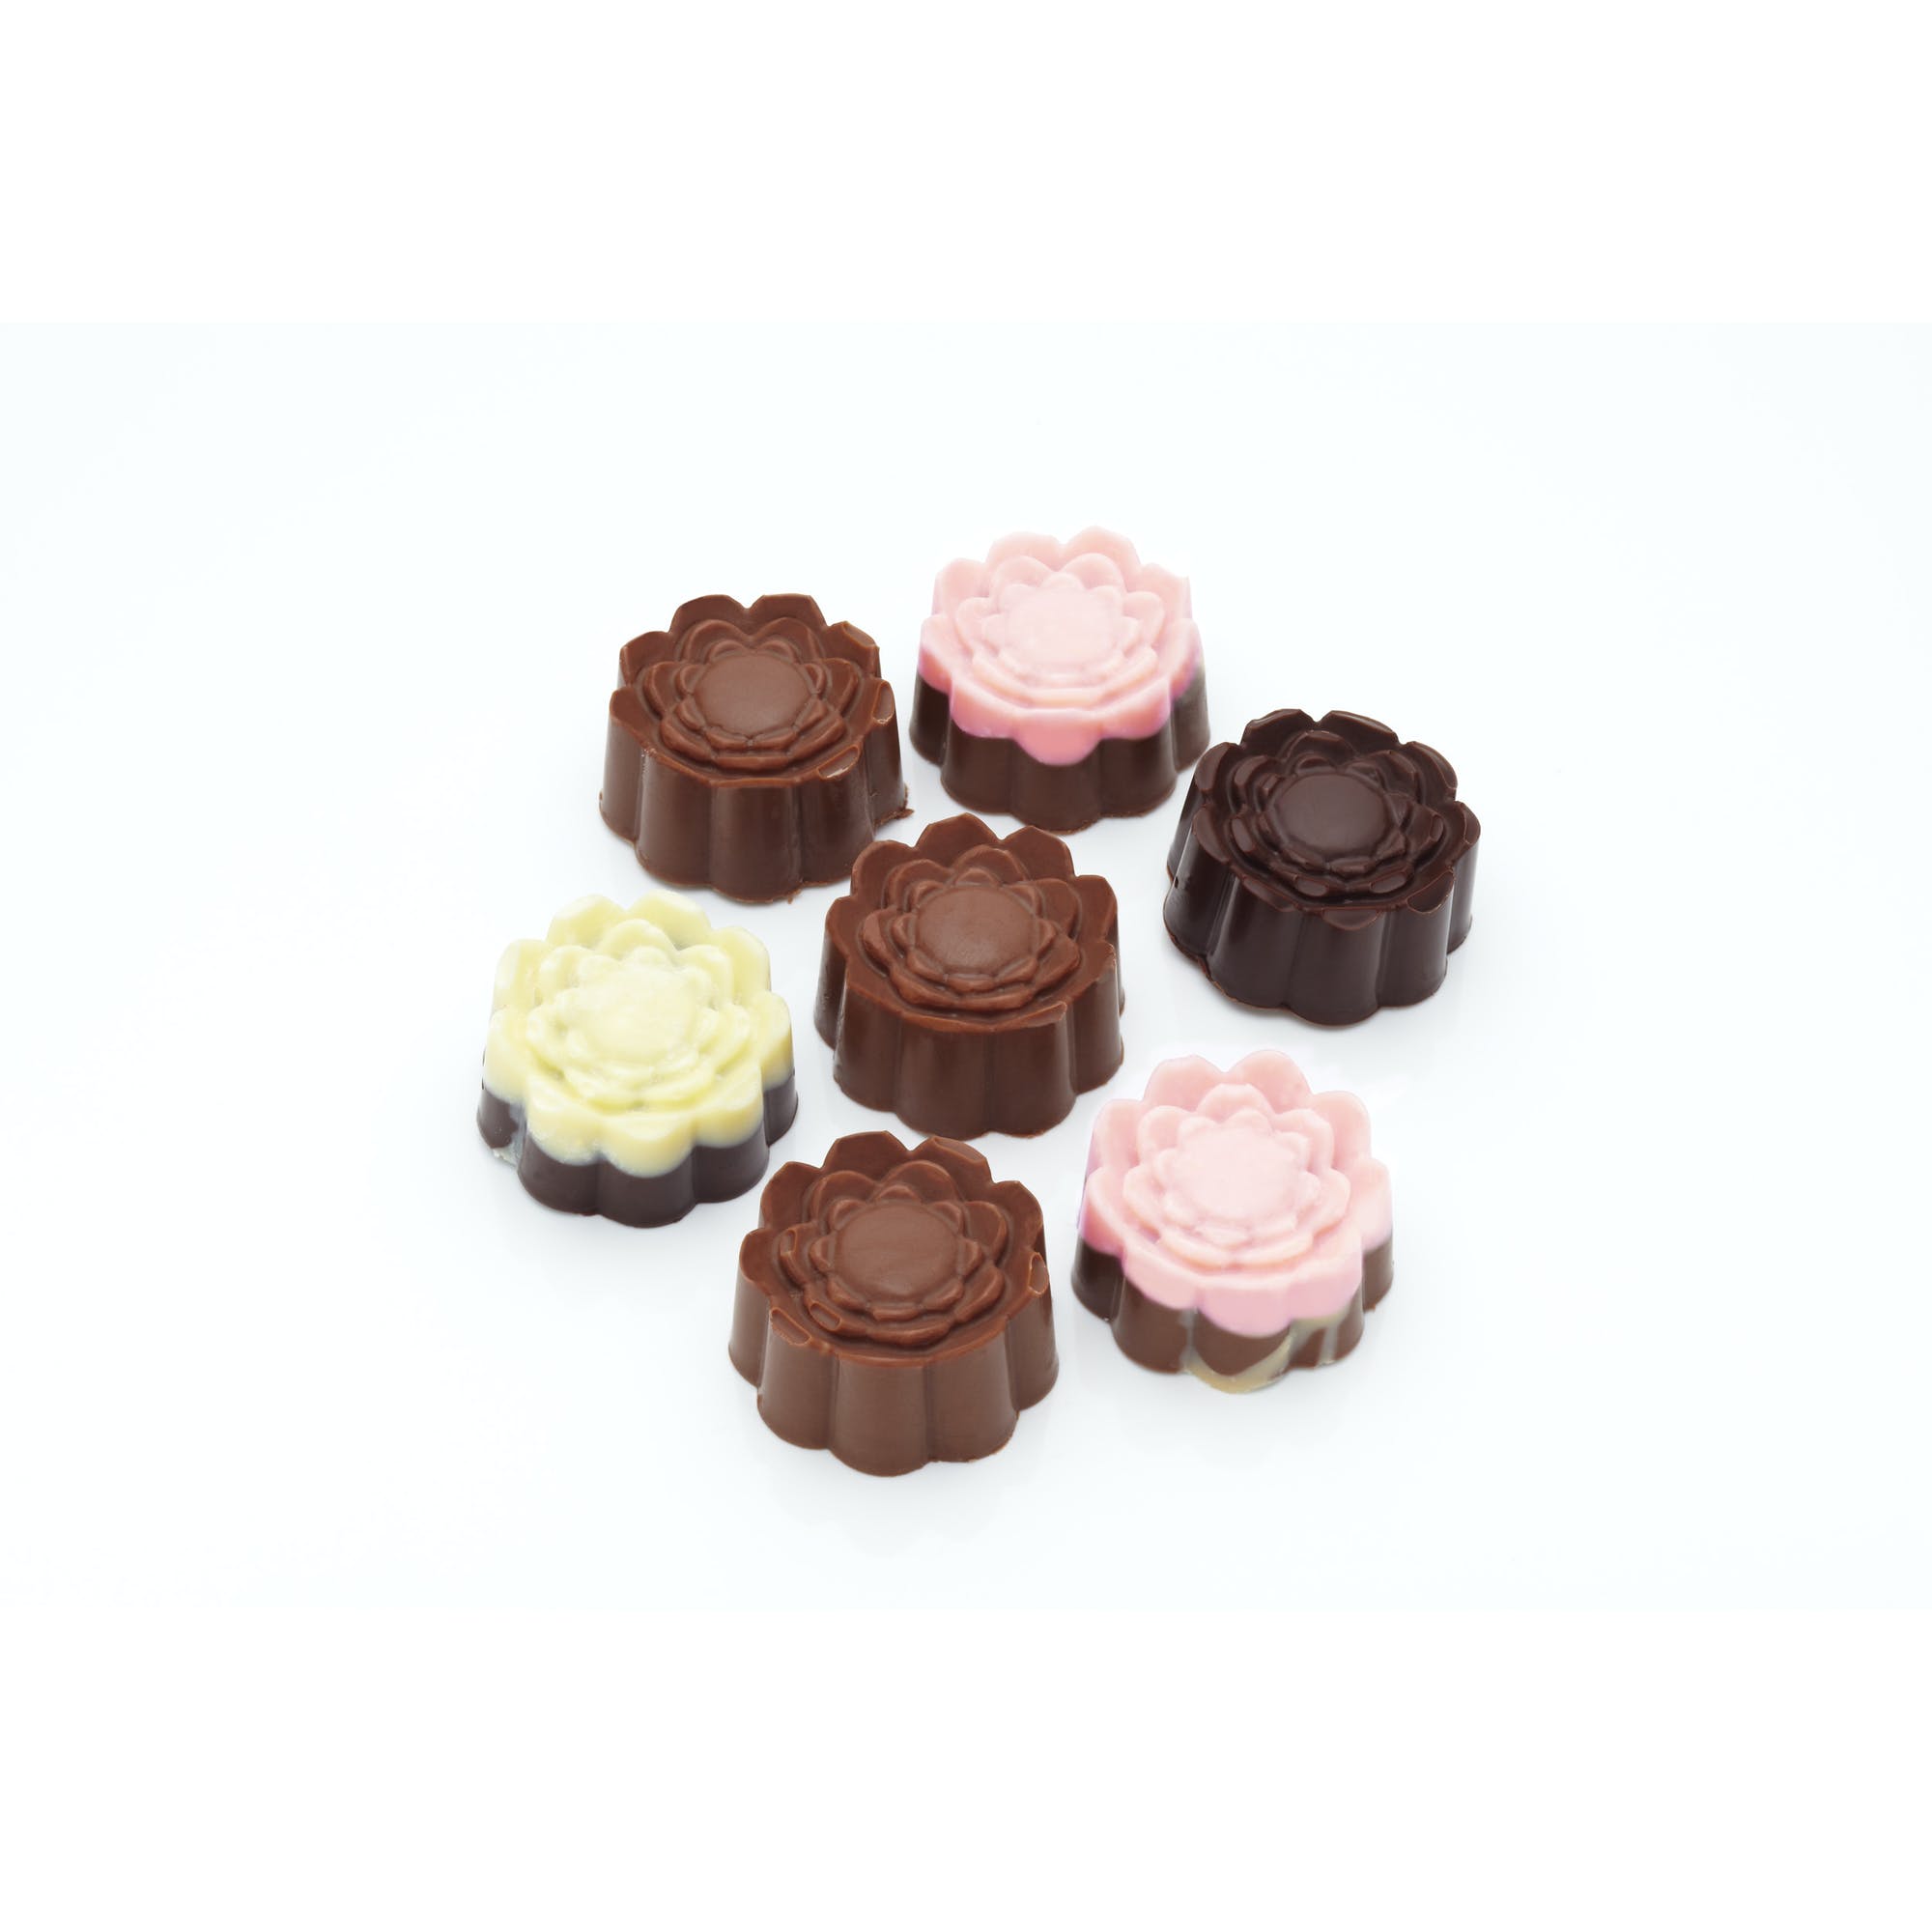 Sweetly Does It Chocolate Roses Silicone Mould - The Cooks Cupboard Ltd